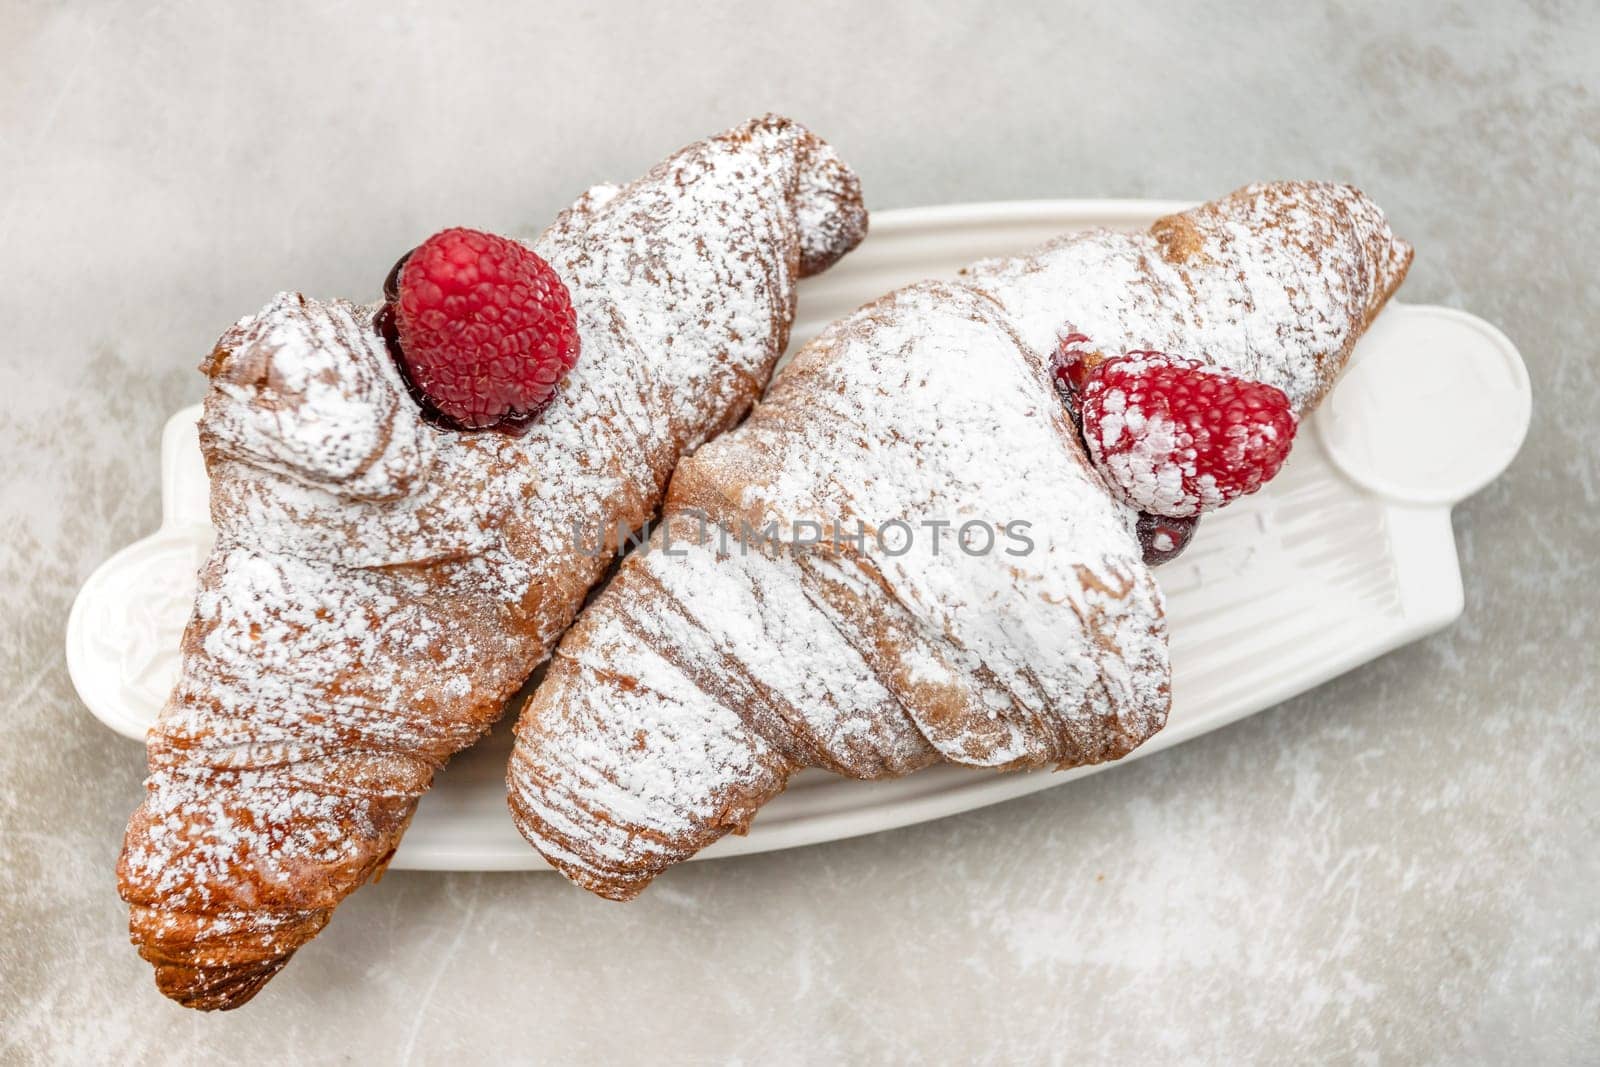 Croissants with jam and berries by germanopoli